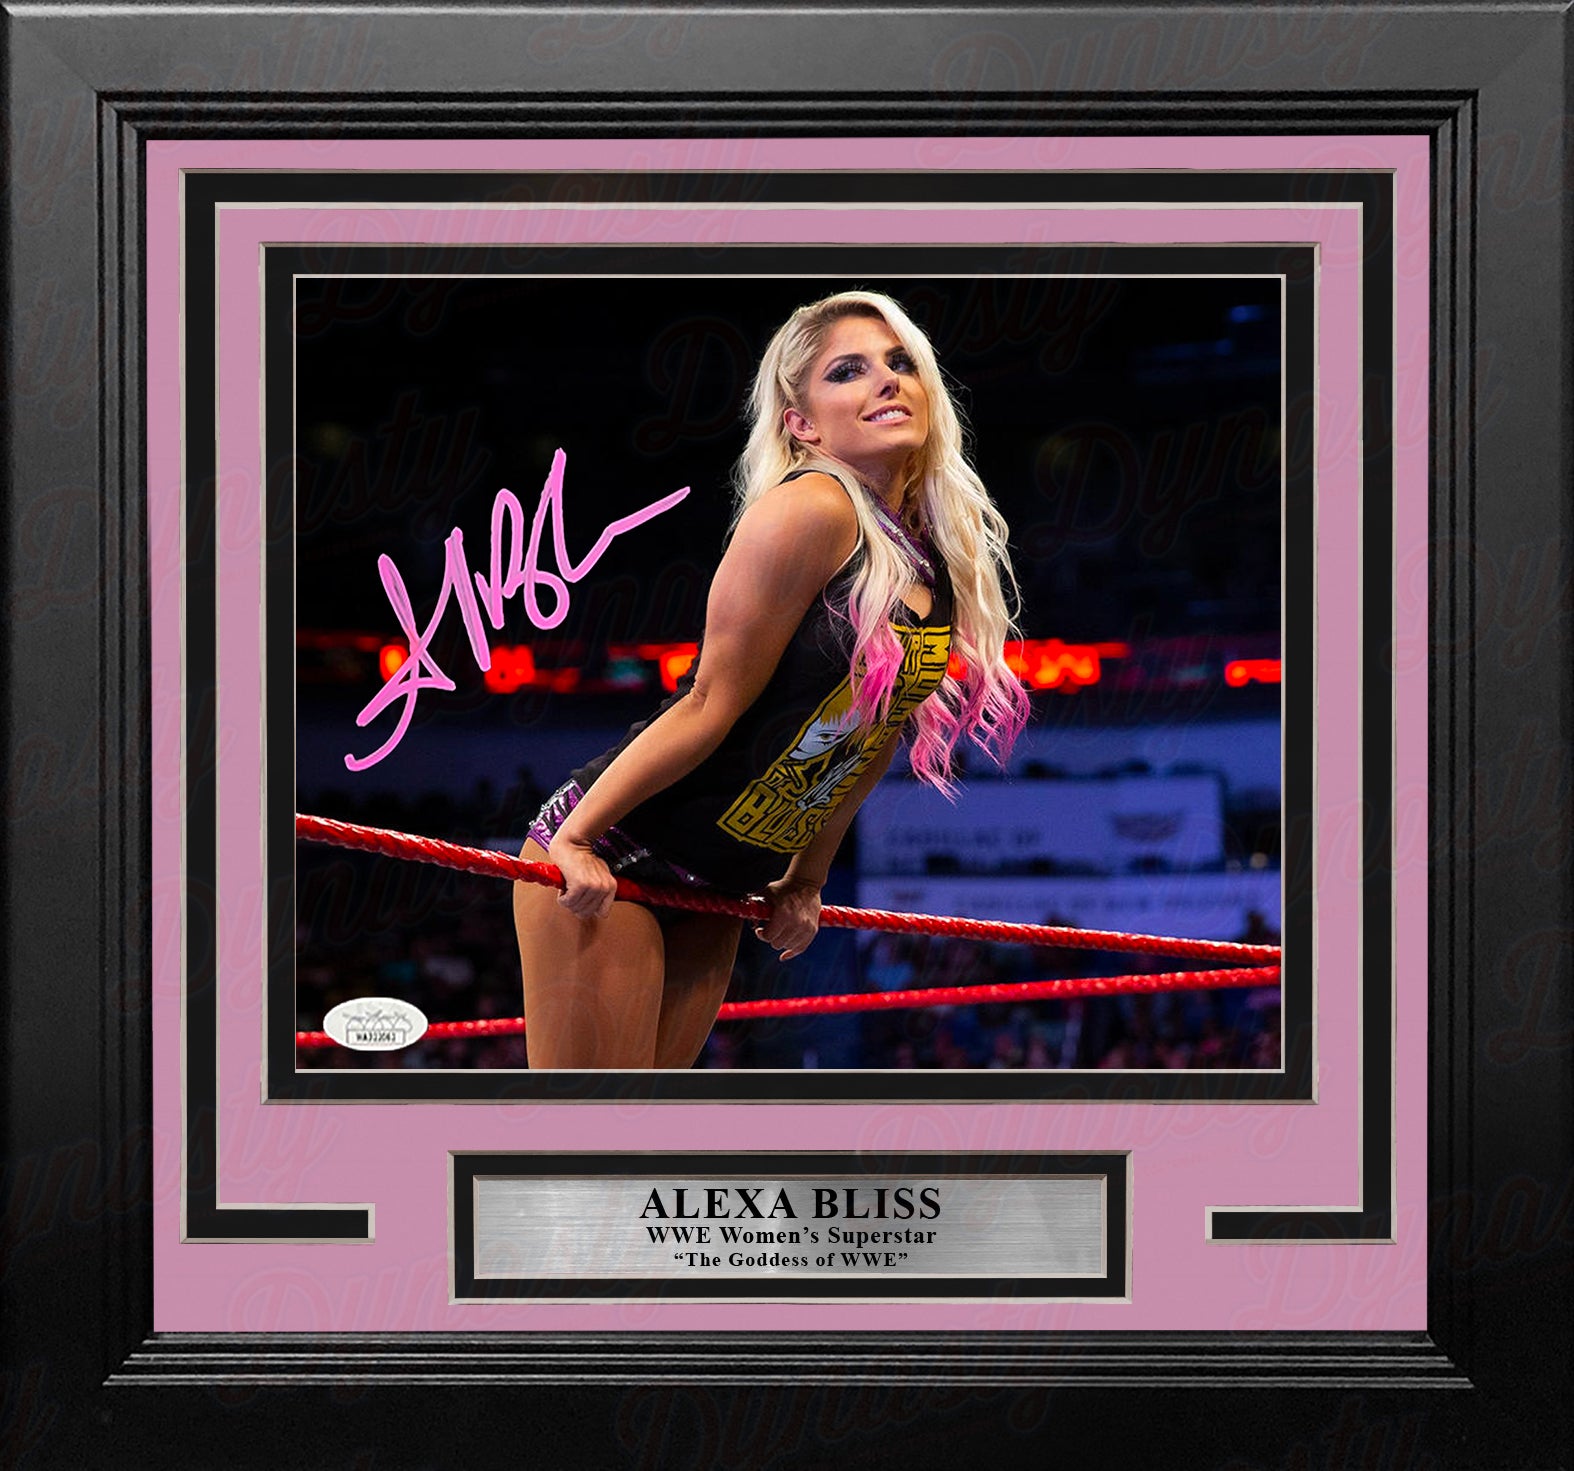 Alexa Bliss Hanging on the Ropes Autographed Framed WWE Wrestling Photo - Dynasty Sports & Framing 